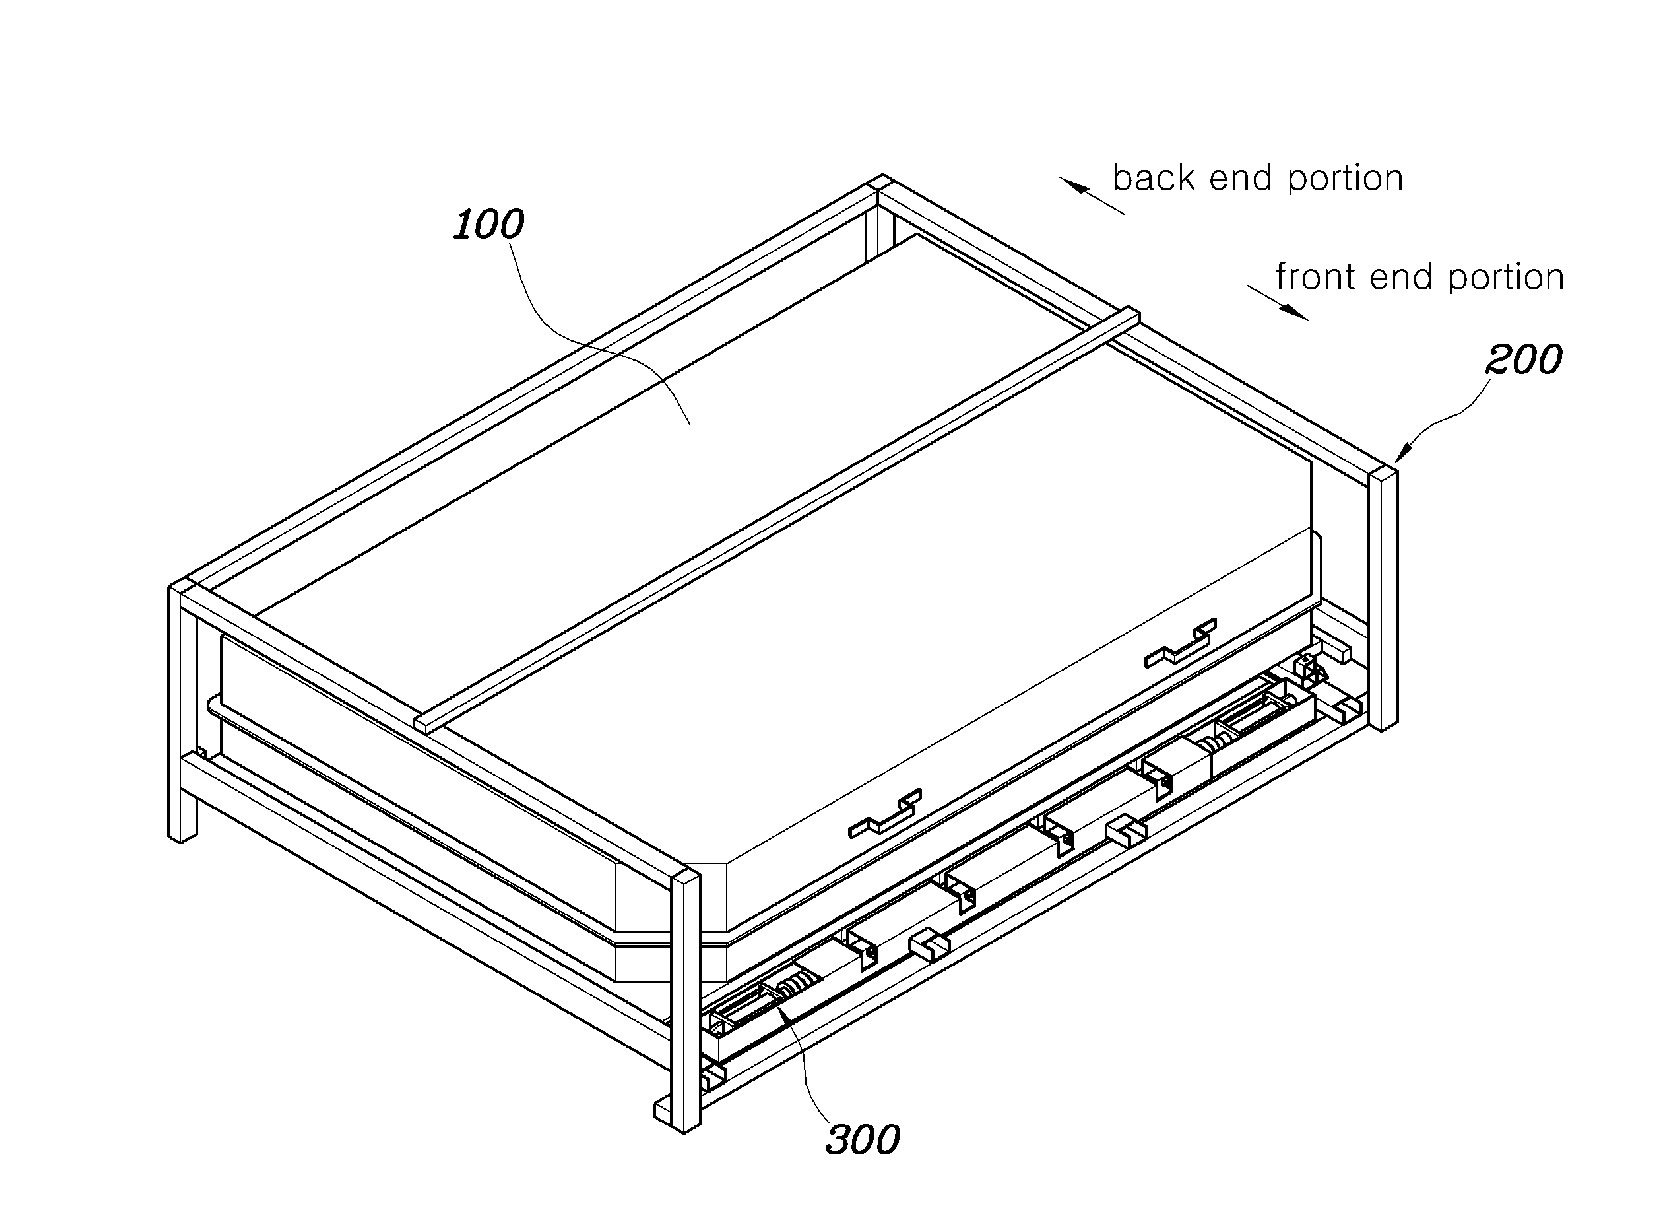 Battery pack holding apparatus